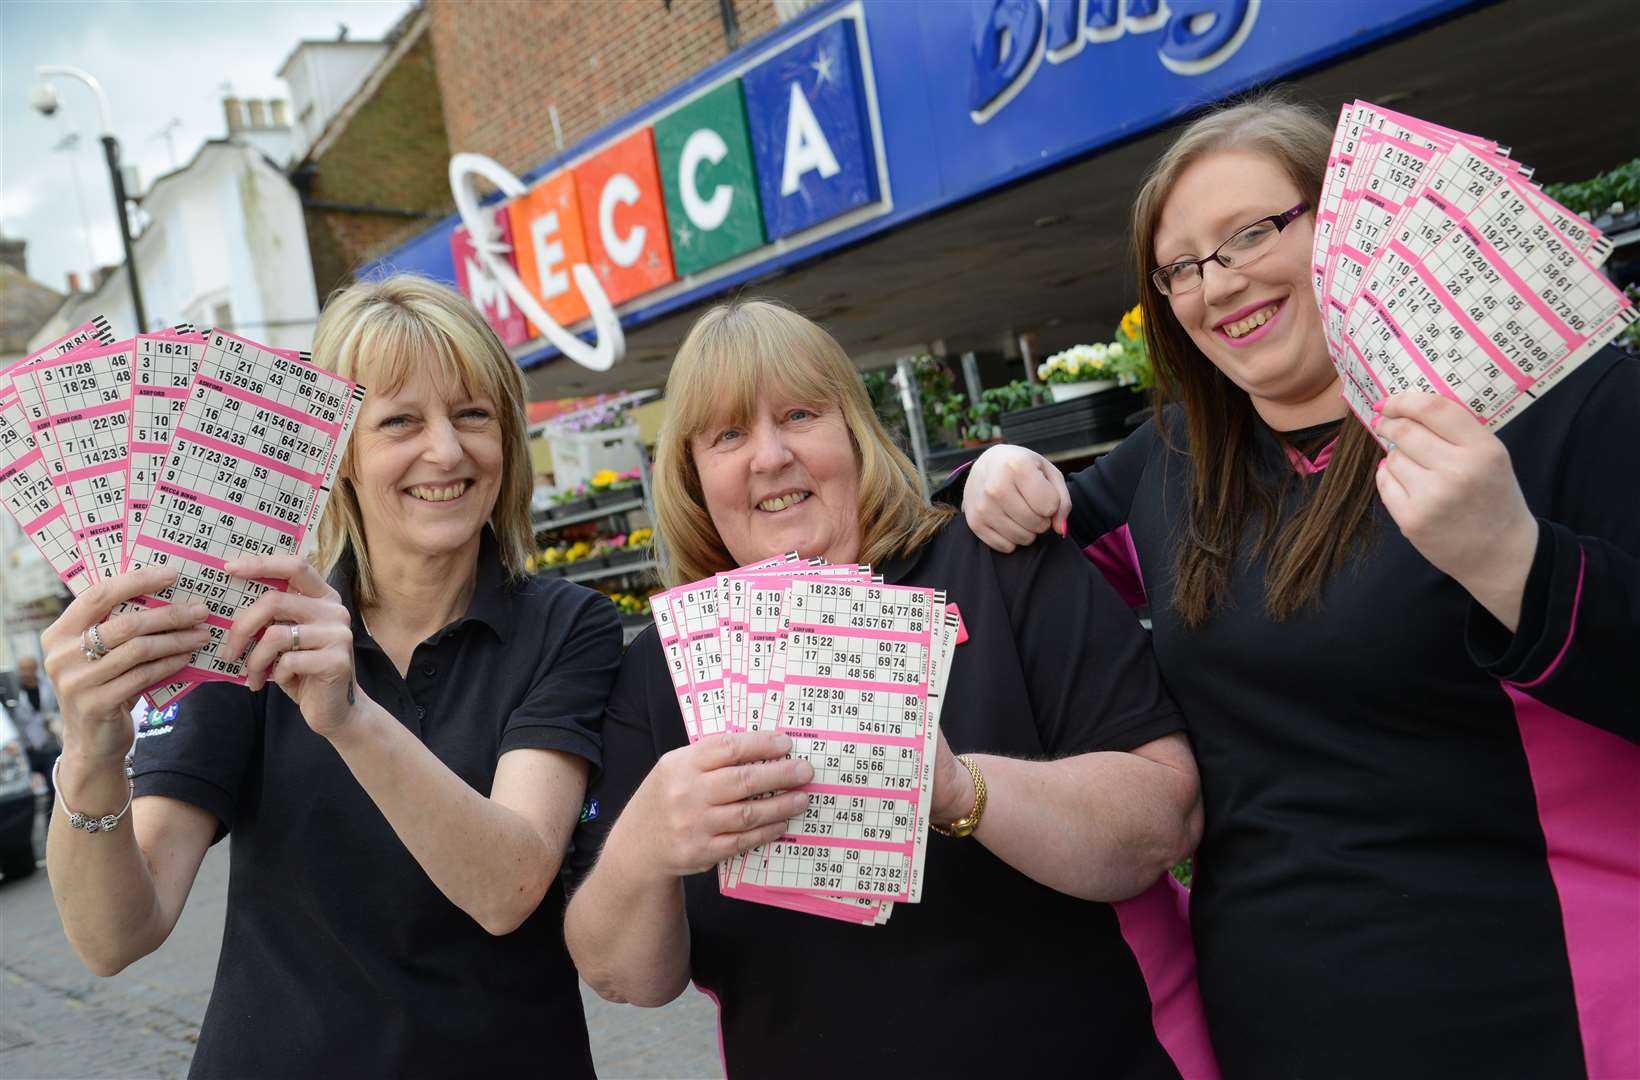 Mary-Ann Lewington, Carole Rayfield and Jodie Bourne at Mecca Bingo in 2016